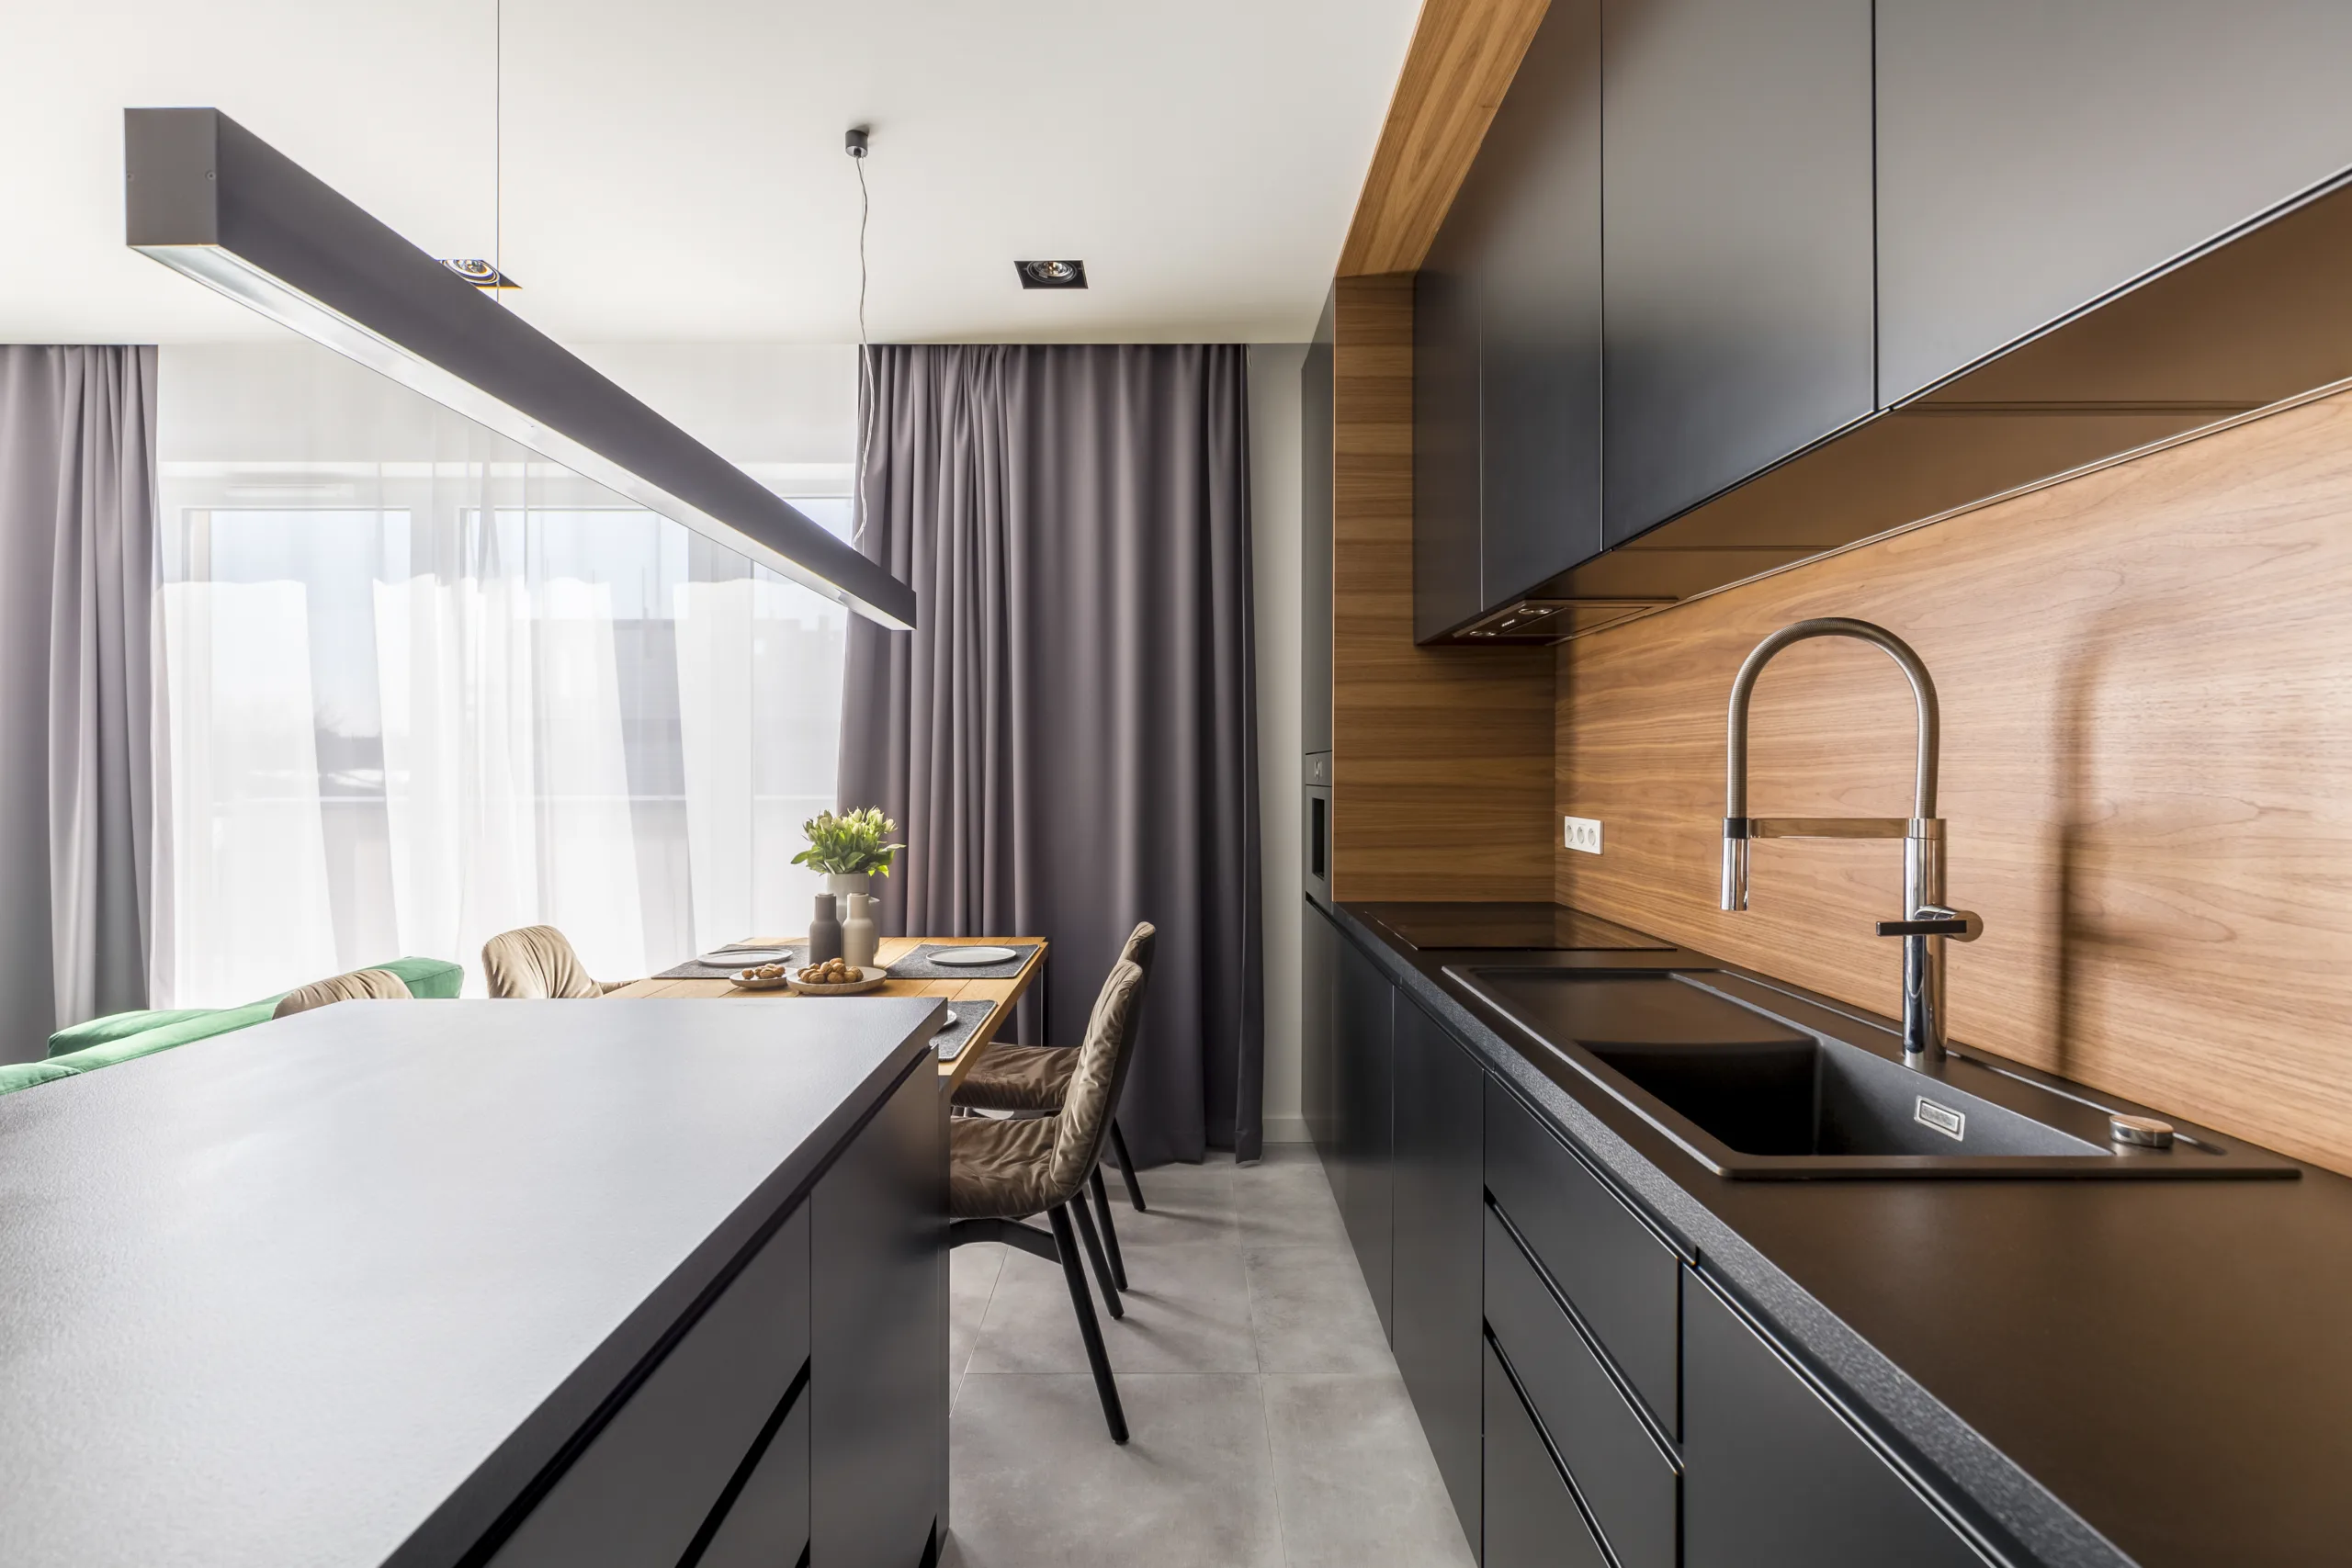 https://ootwc.com/wp-content/uploads/2023/01/Black-Kitchen-Cabinets-2-scaled.webp